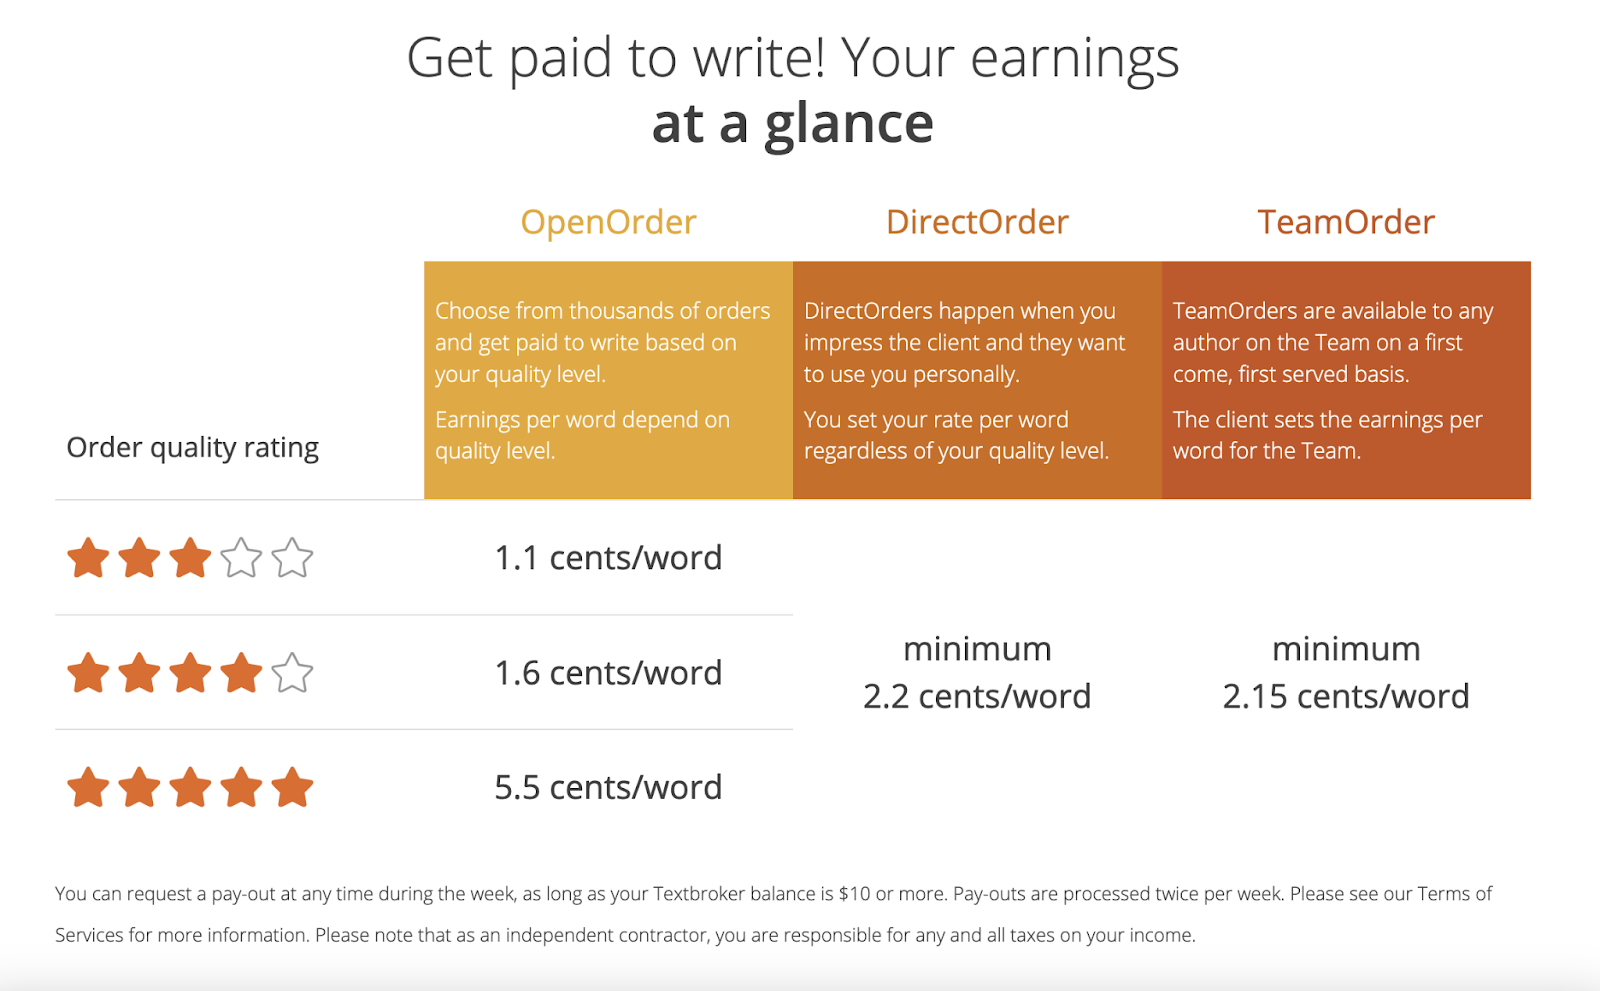 Textbroker's paying structure for writers